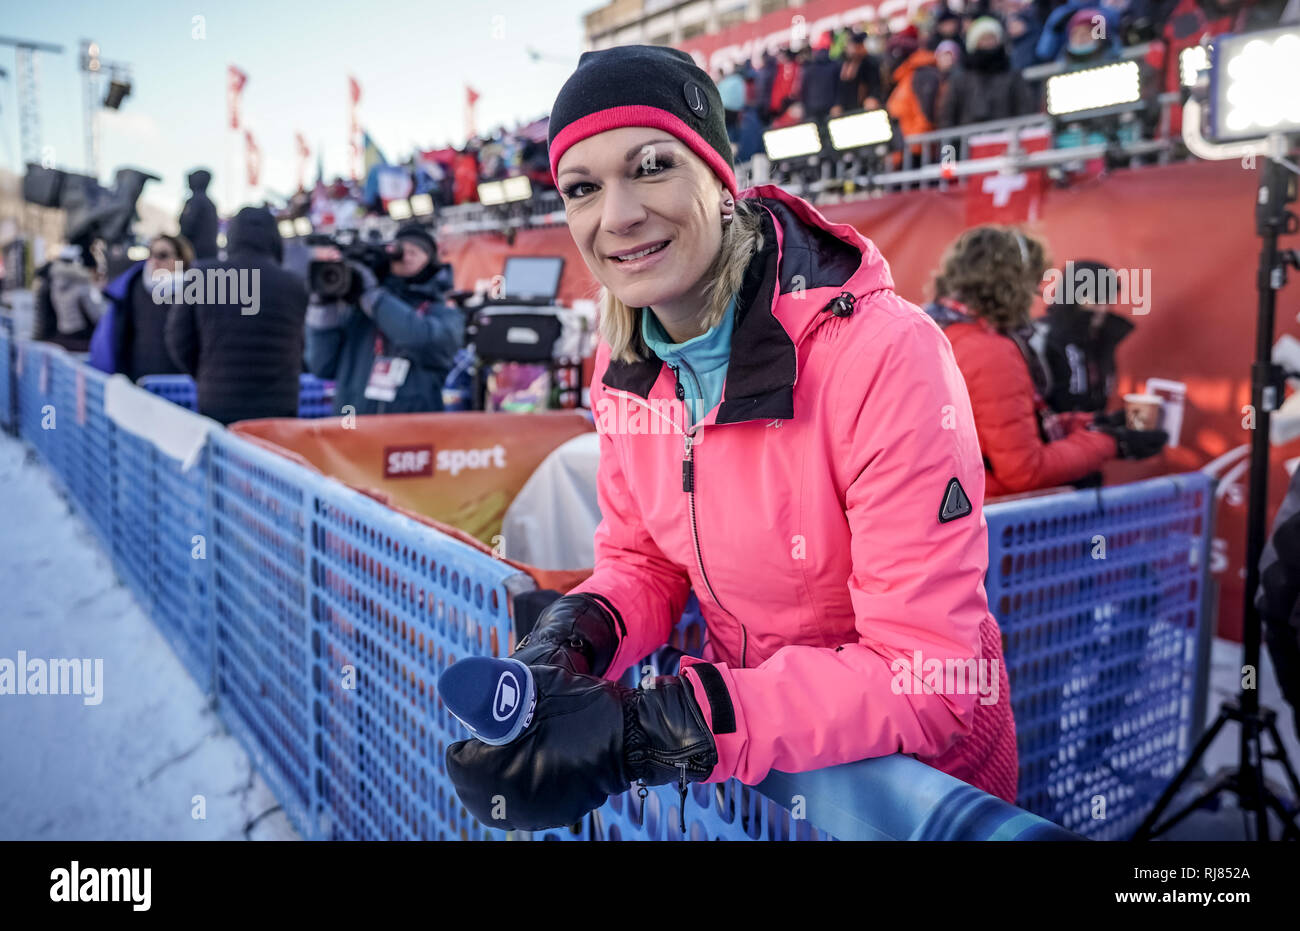 Are, Sweden. 05th Feb, 2019. Alpine skiing: Maria Höfl-Riesch, former Olympic ski champion and currently TV expert for ARD, in the finish area of the World Championships. Credit: Michael Kappeler/dpa/Alamy Live News Stock Photo